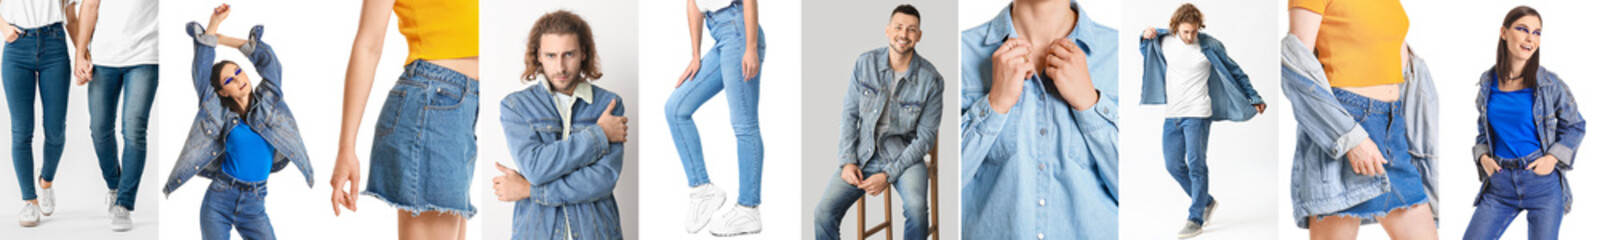 Collection of young people in stylish jeans clothes on light background